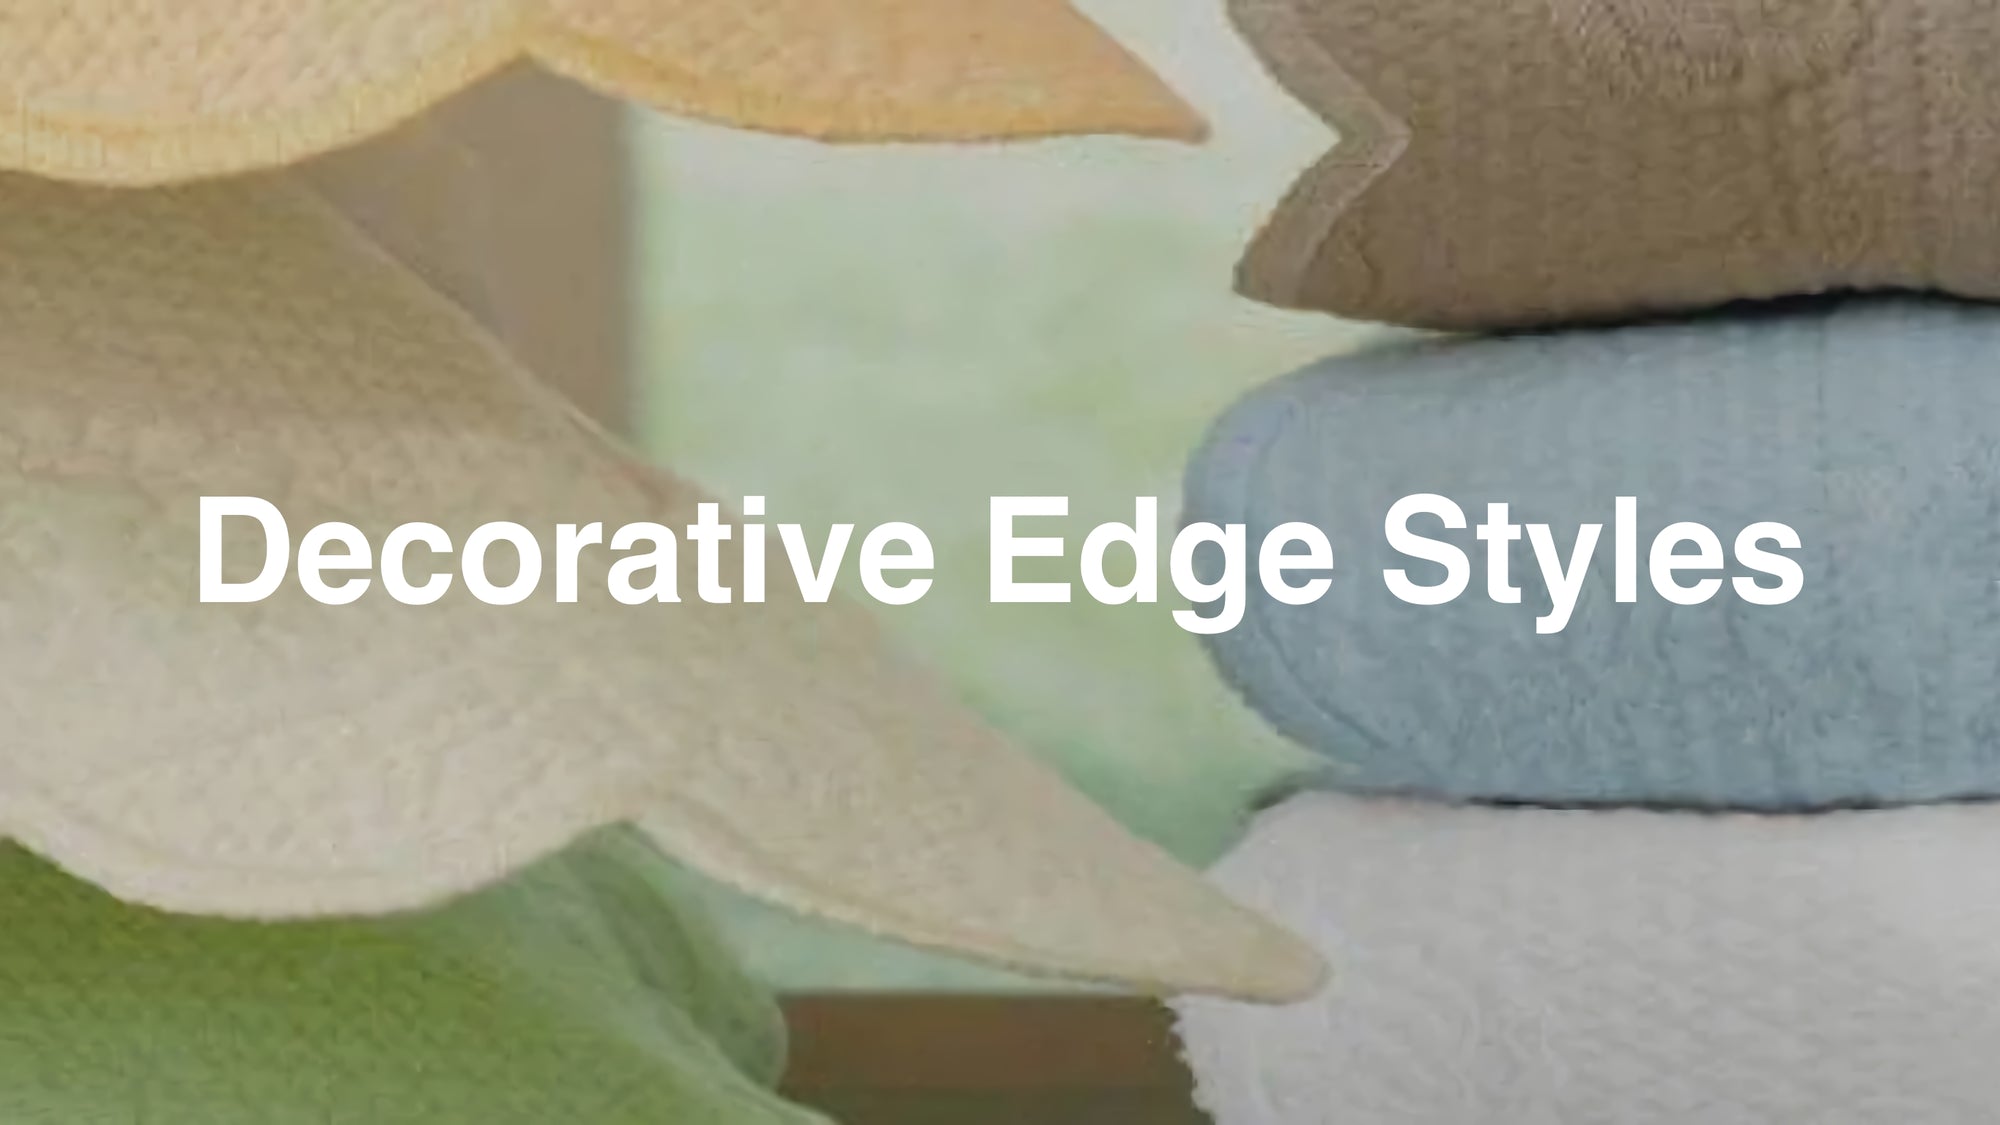 Edges of Decorative Pillows in Different Brightly Colors